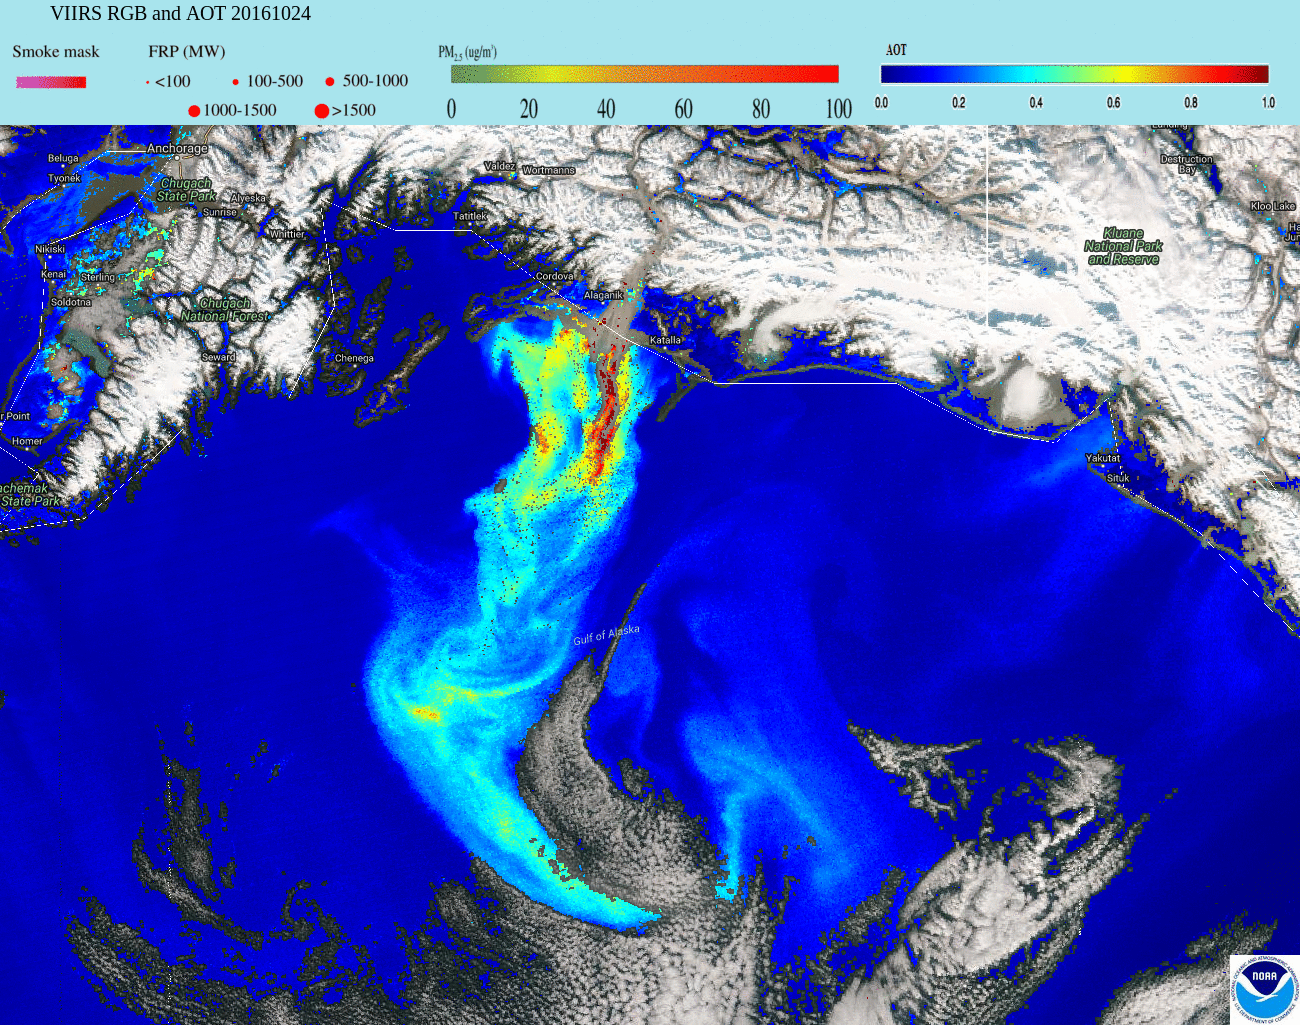 Suomi NPP VIIRS true-color RGB and Aerosol Optical Thickness images for 24 October [click to enlarge]